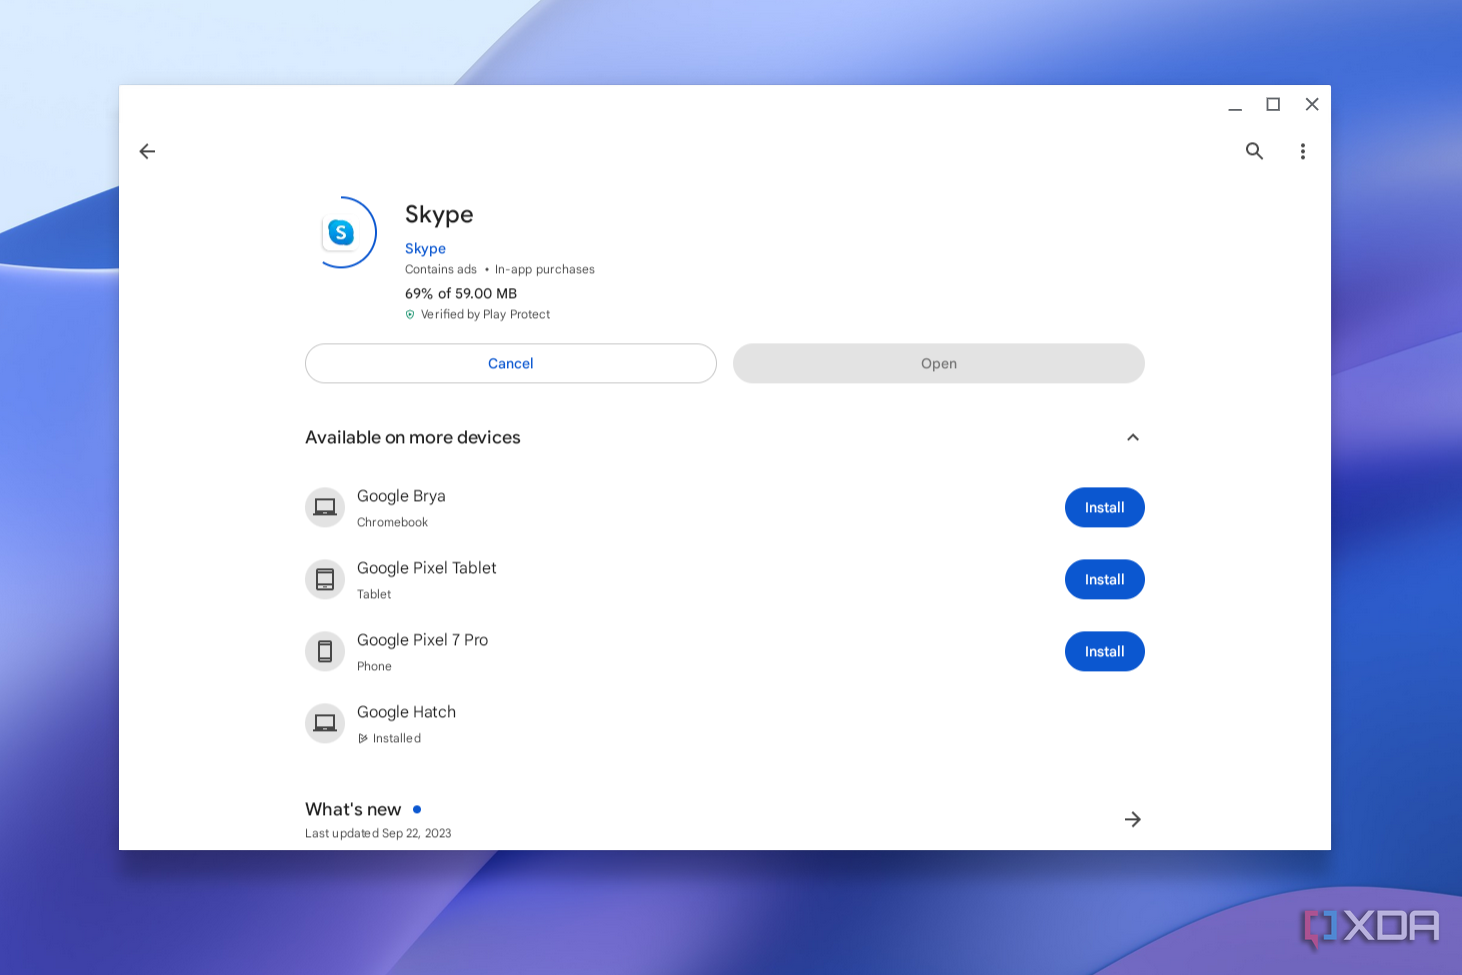 A listing for Skype in the Google Play Store on ChromeOS.